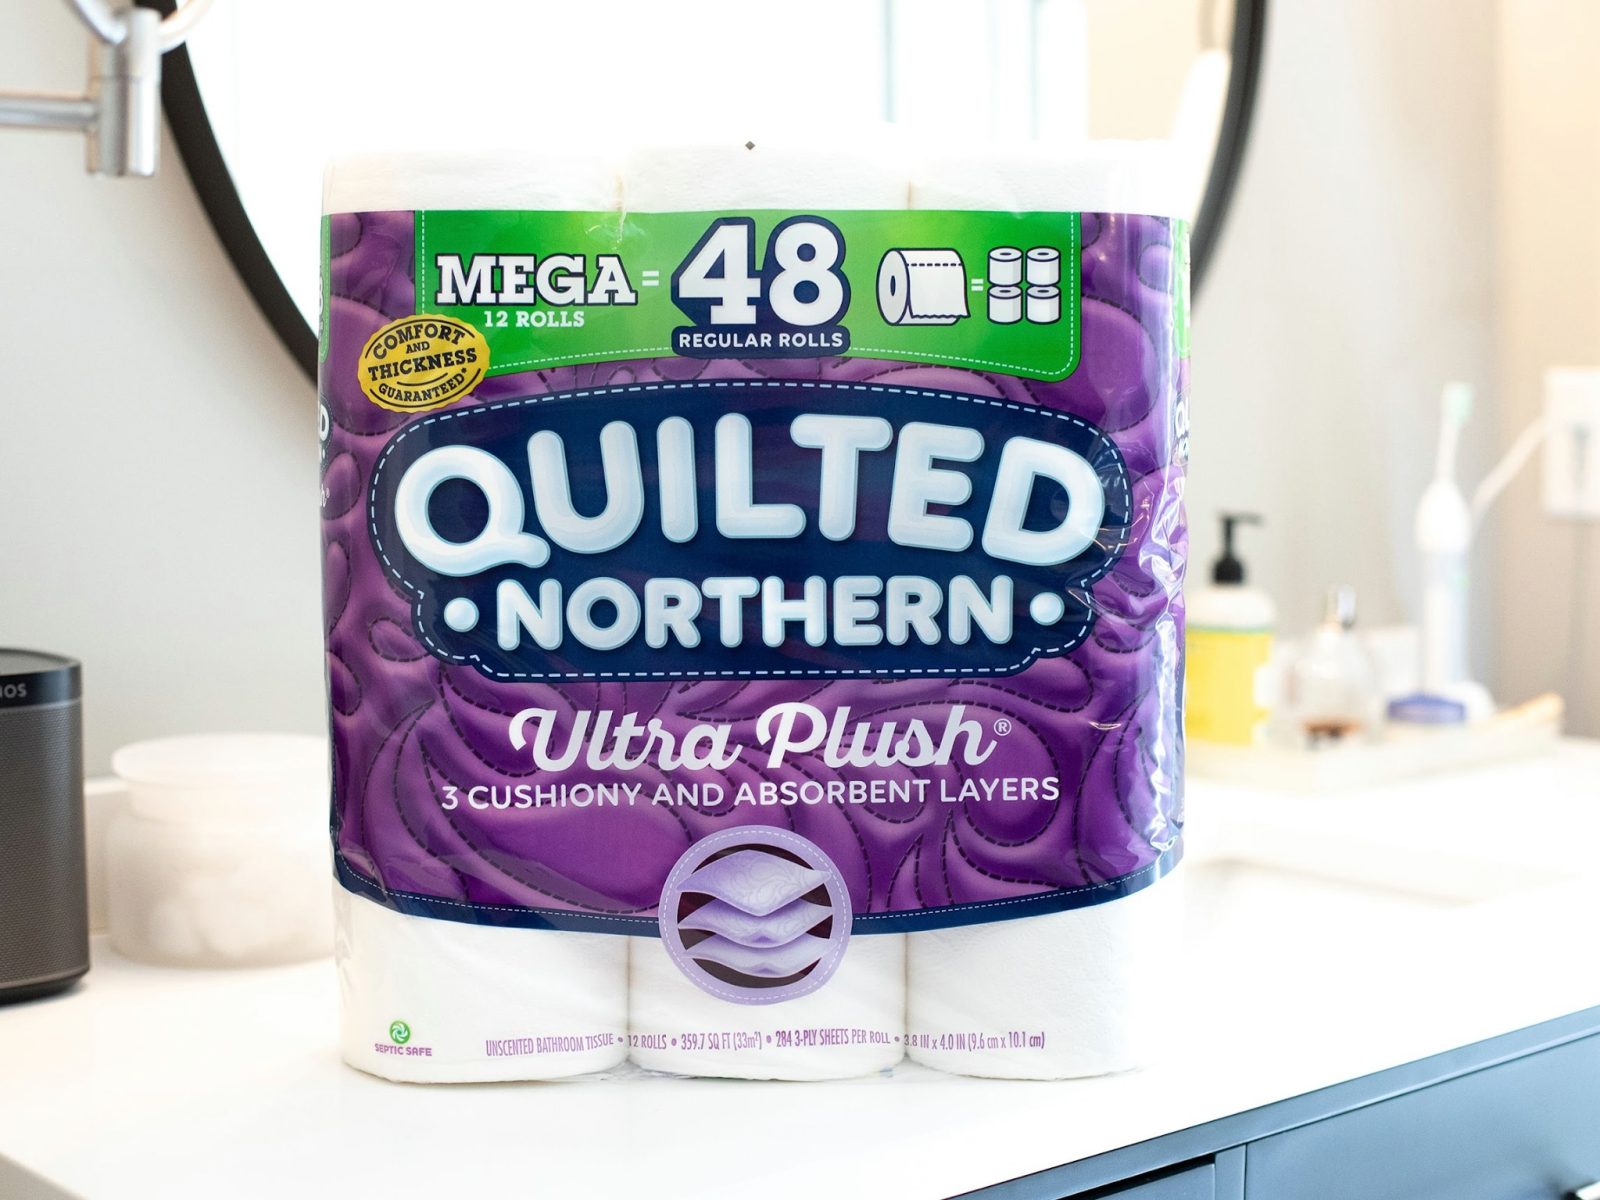 Mega Roll Packages Of Quilted Northern Toilet Paper As Low As $9.99 At  Kroger - iHeartKroger